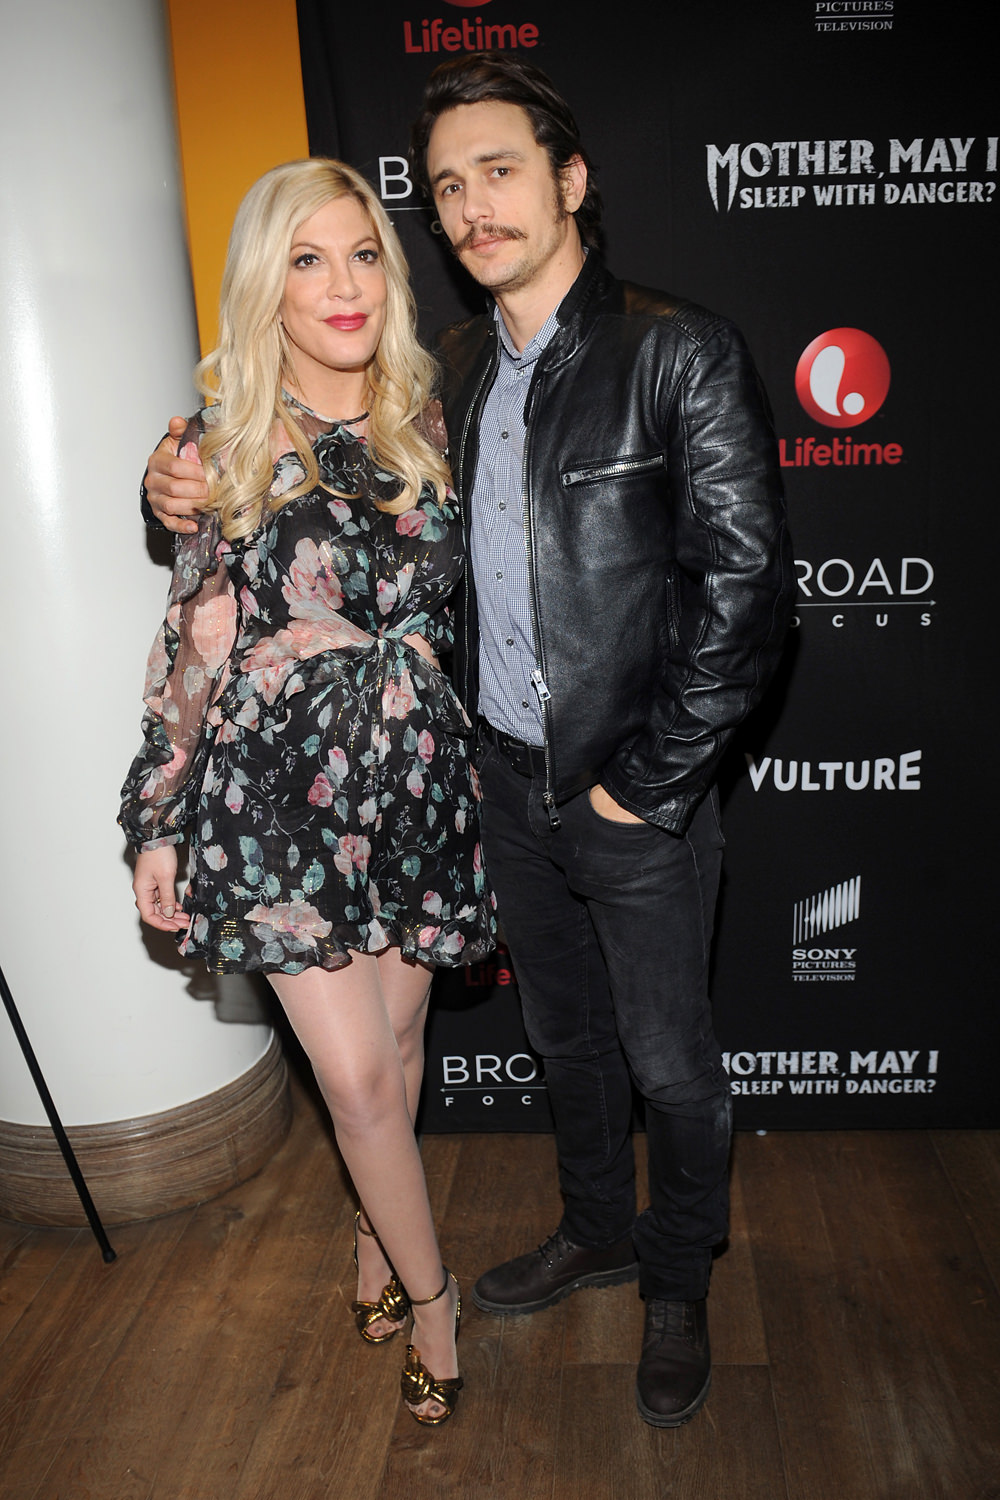 Tori-Spelling-James-Franco-Mother-May-I-Sleep-With-Danger-Movie-Premiere-Red-Carpet-fashion-Tom-Lorenzo-Site (1)